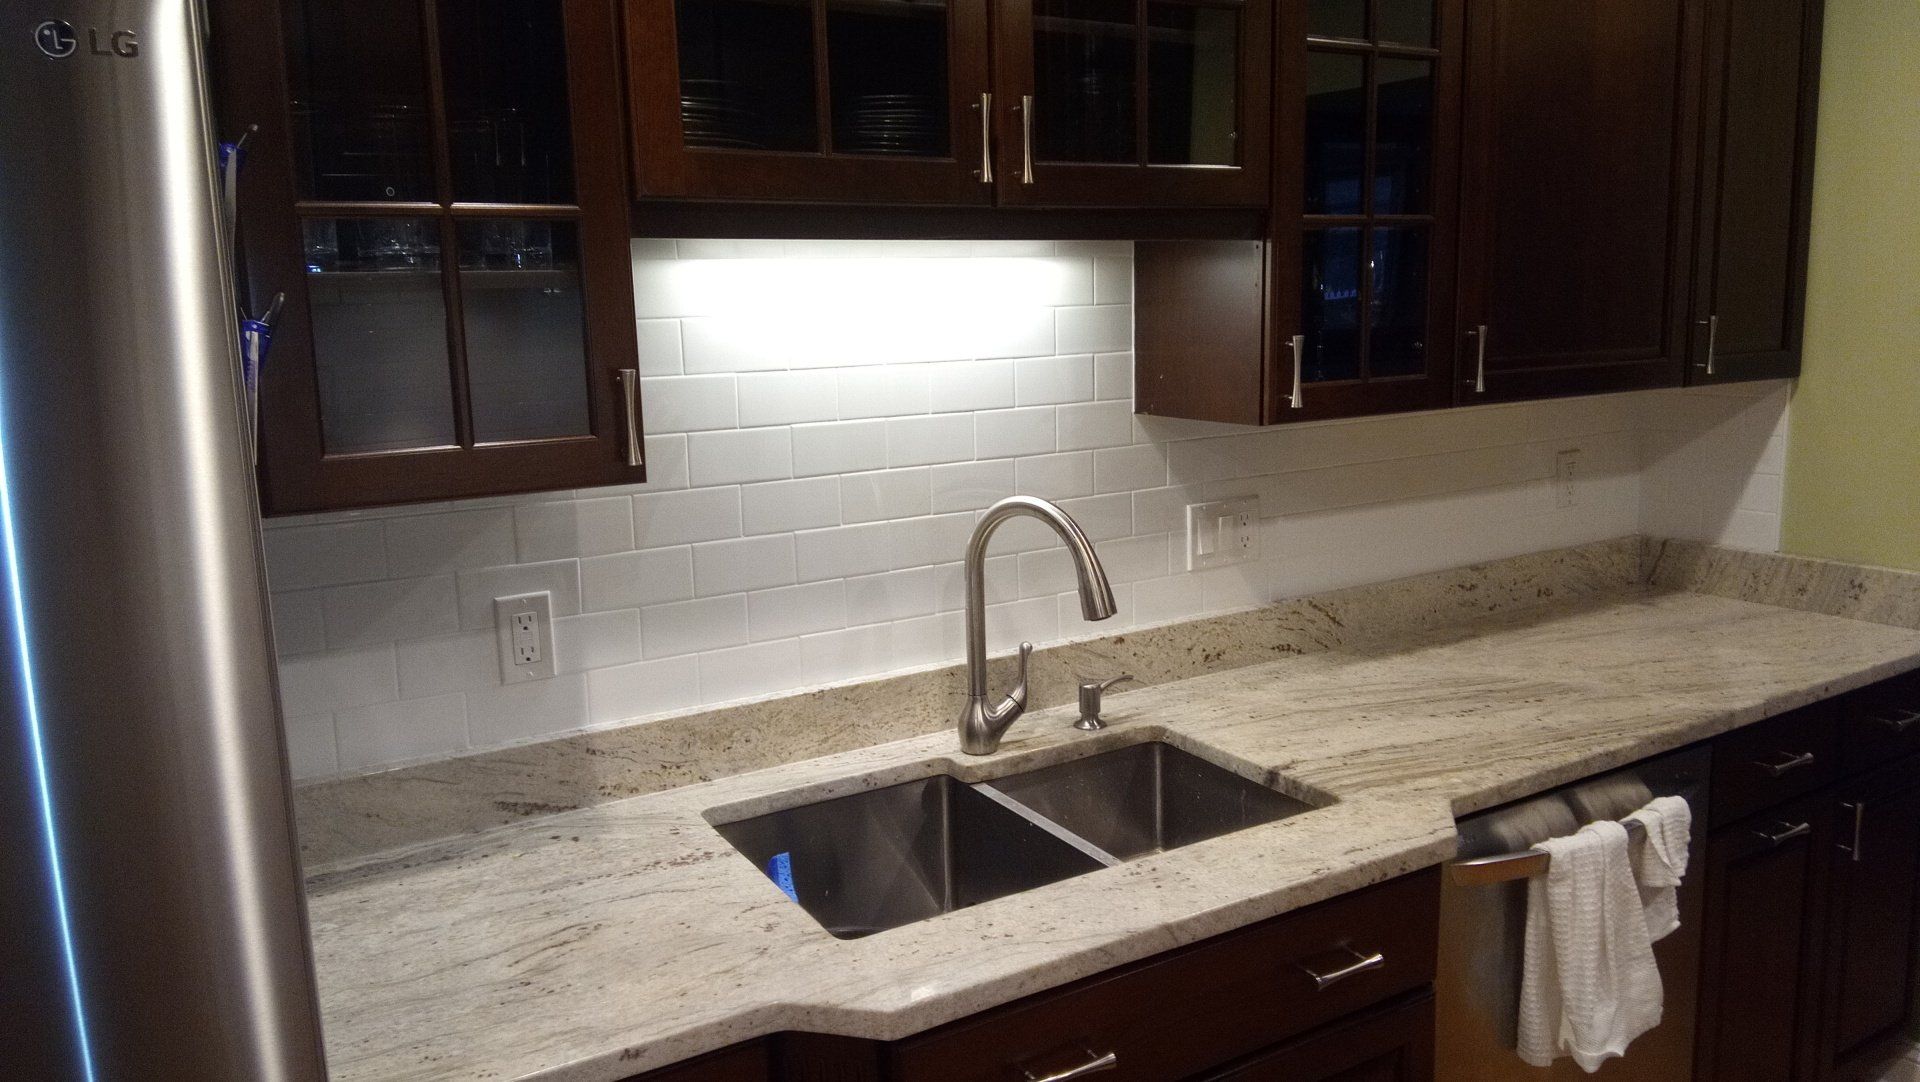 Photo of a kitchen remodel